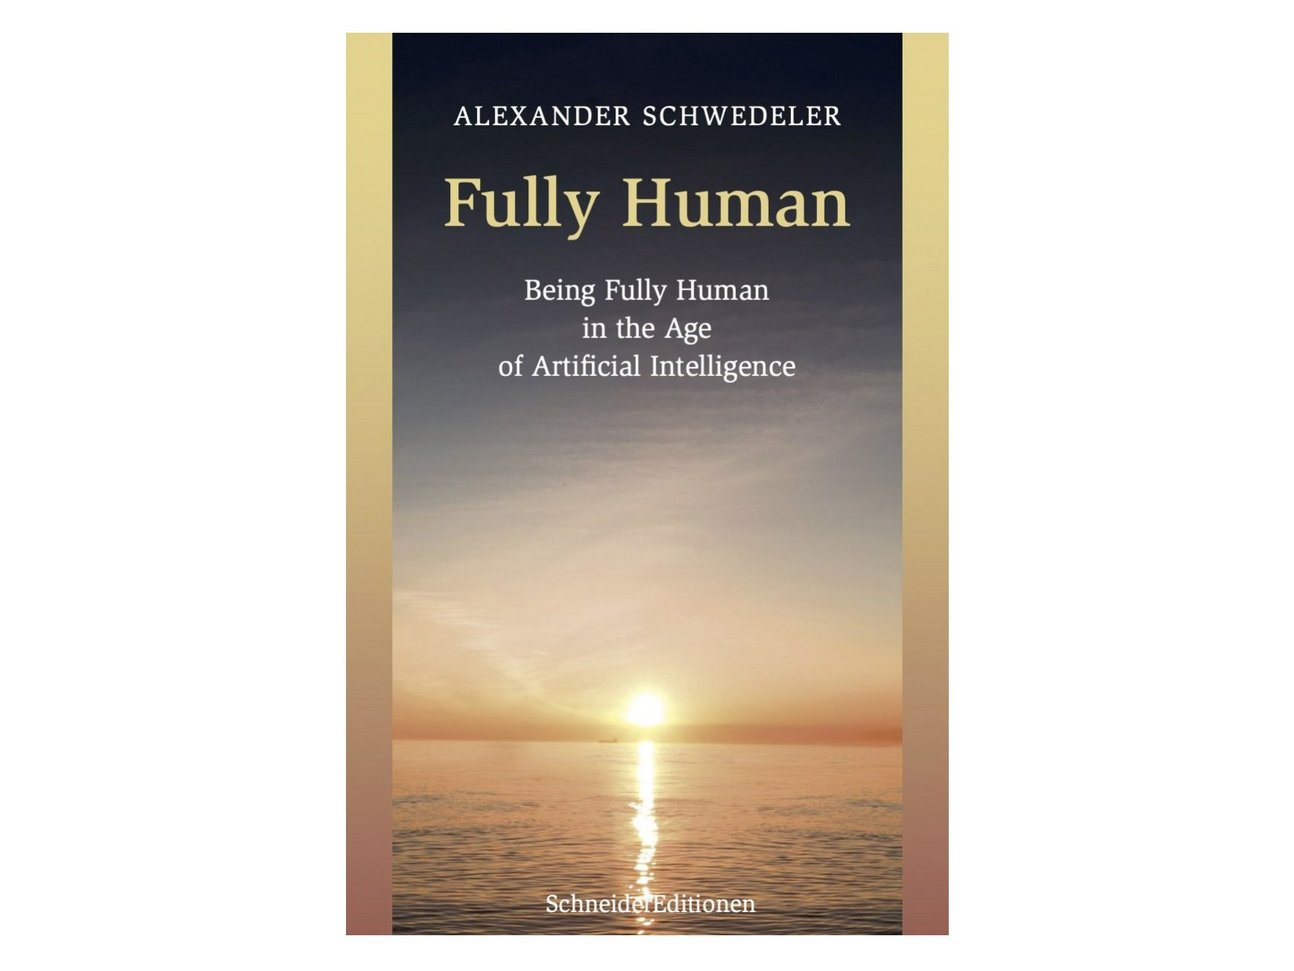 [Translate to English:] Fully Human: Being Fully Human in the Age of Artificial Intelligence